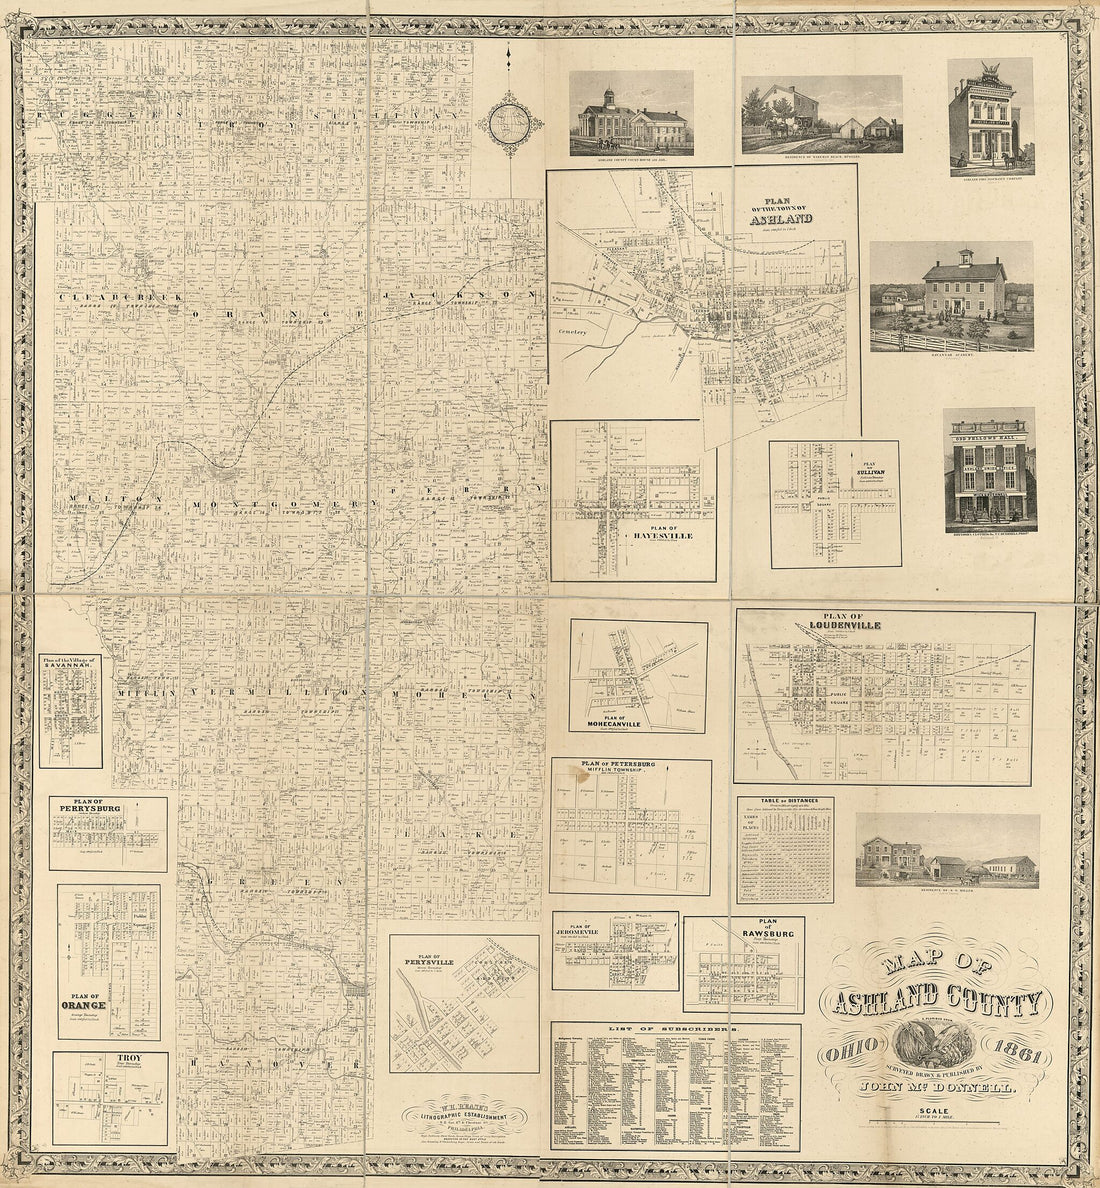 This old map of Map of Ashland County, Ohio from 1861 was created by John McDonnell in 1861